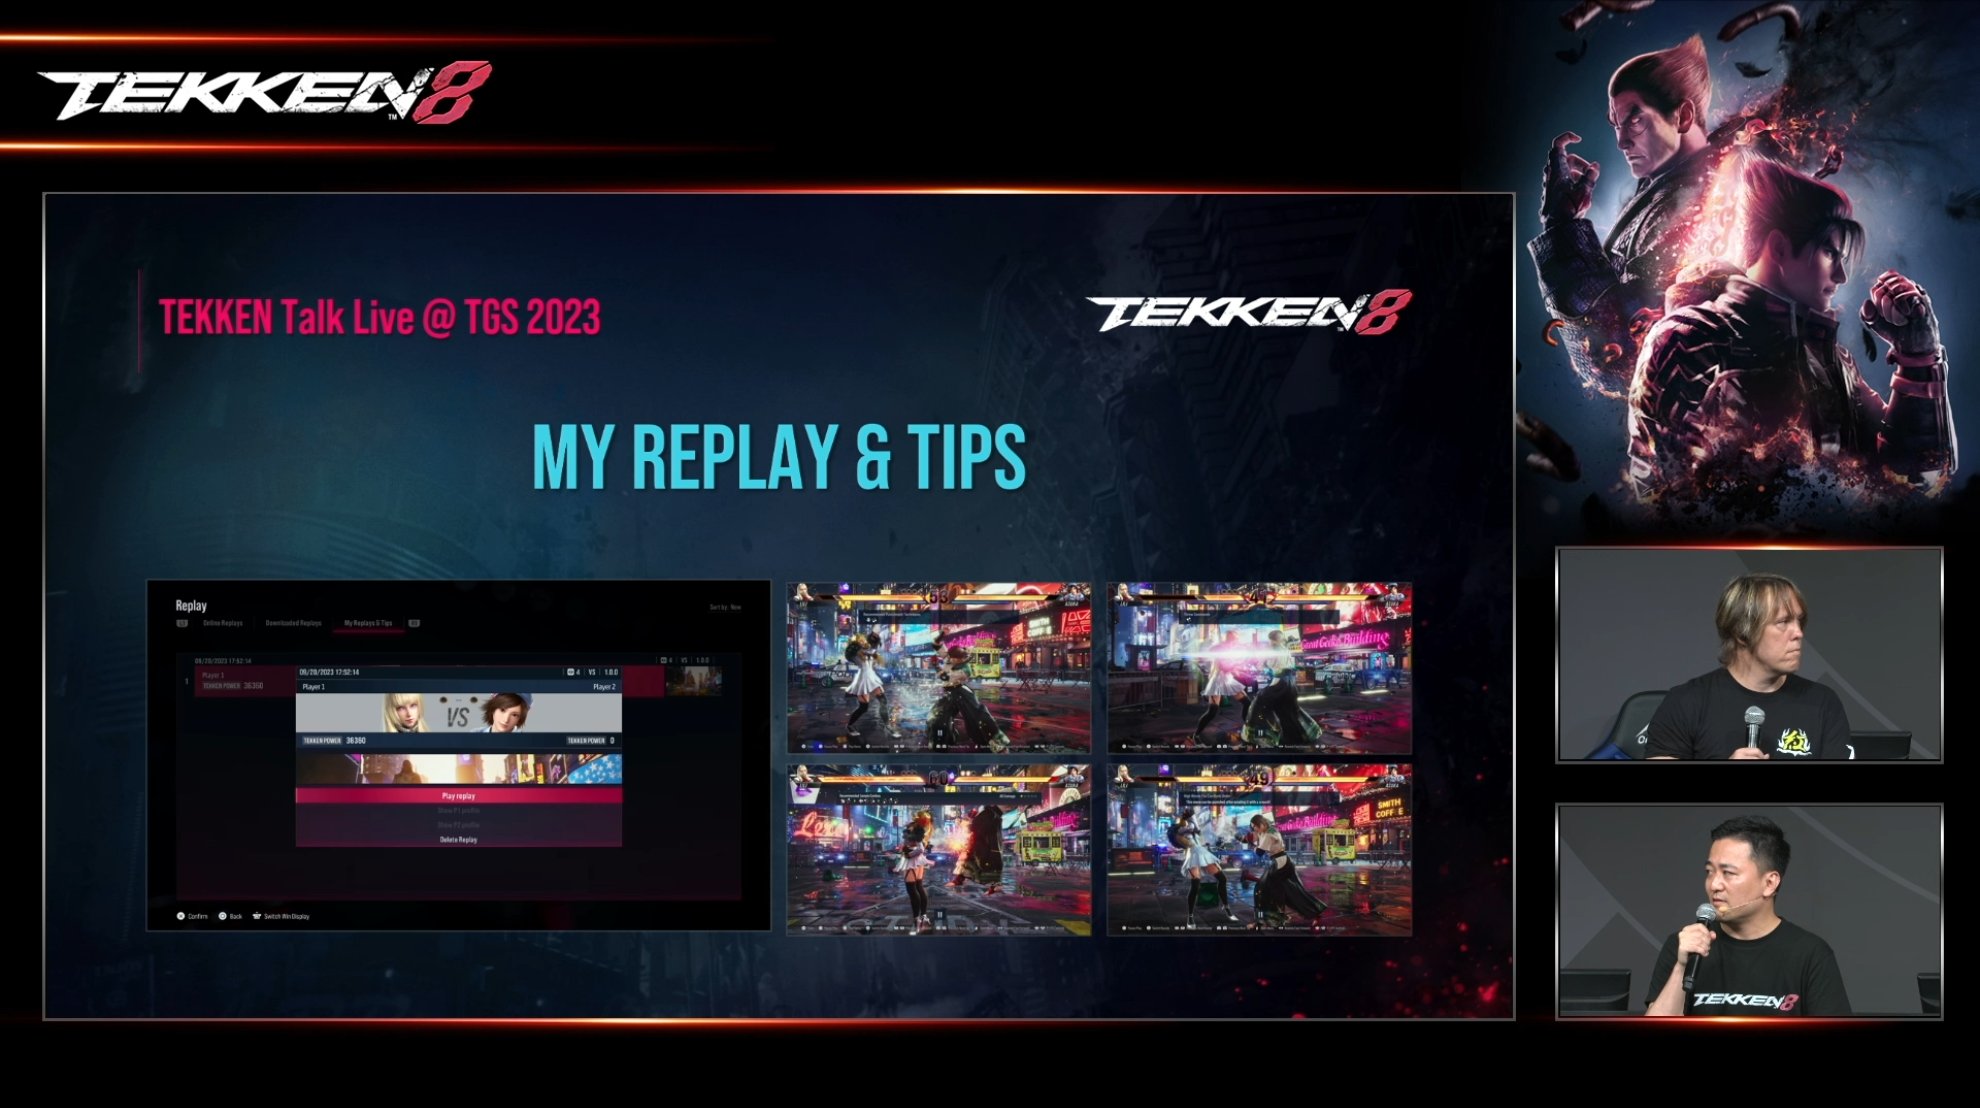 The enhanced version of Replays was revealed at the TGS.